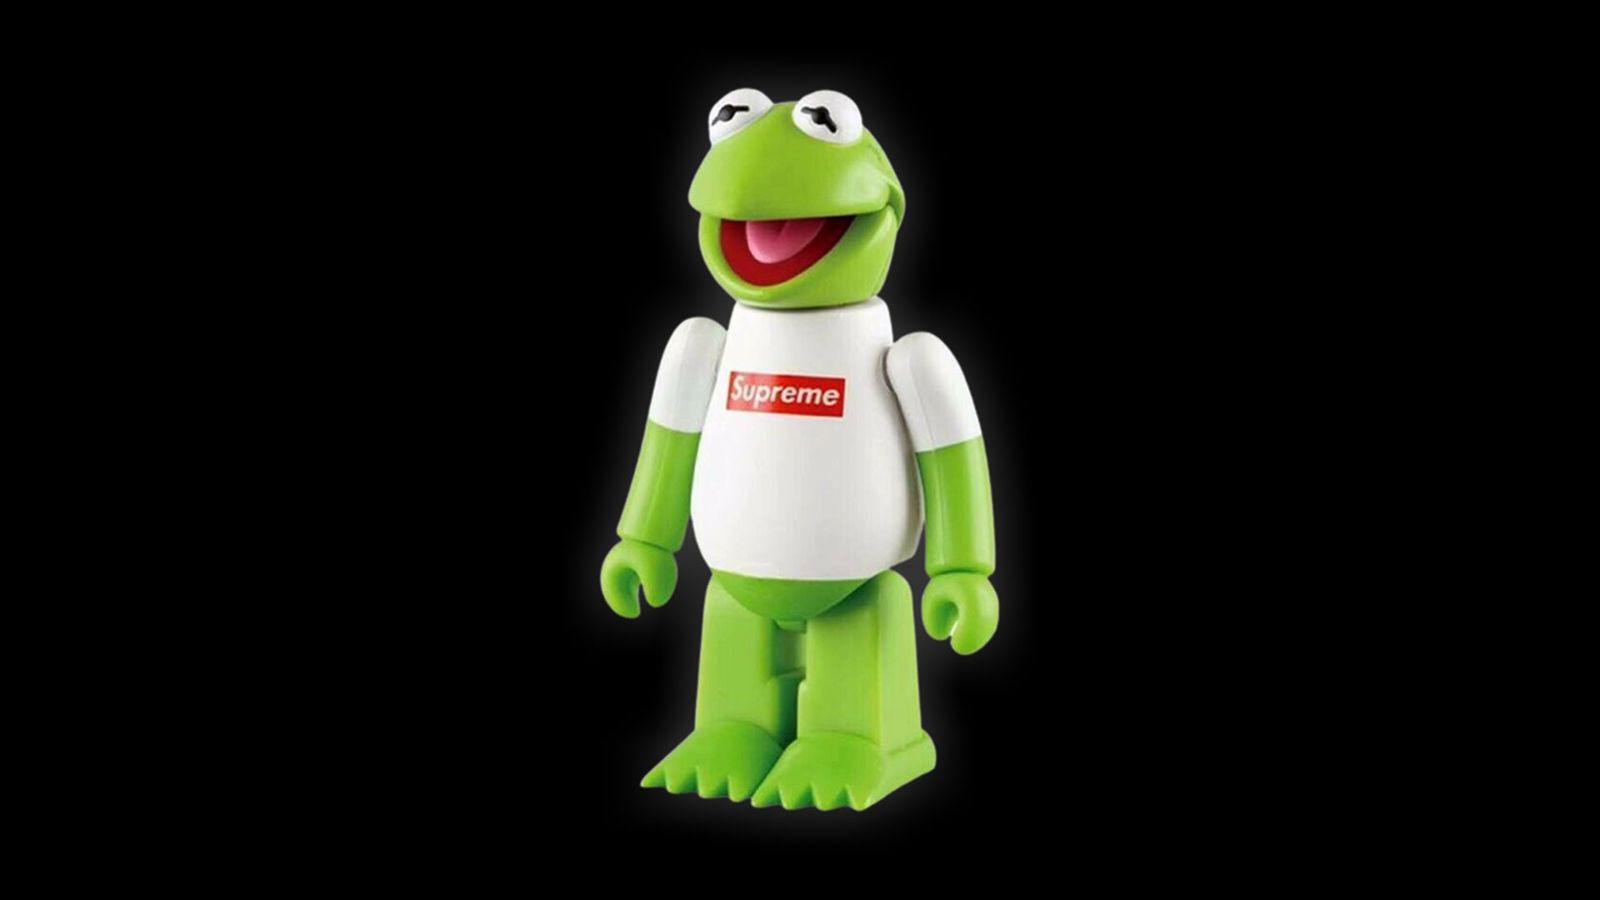 Supreme x Medicom Toy Kermit the Frog Kubrick product image of a Kermit toy wearing a white box logo tee.